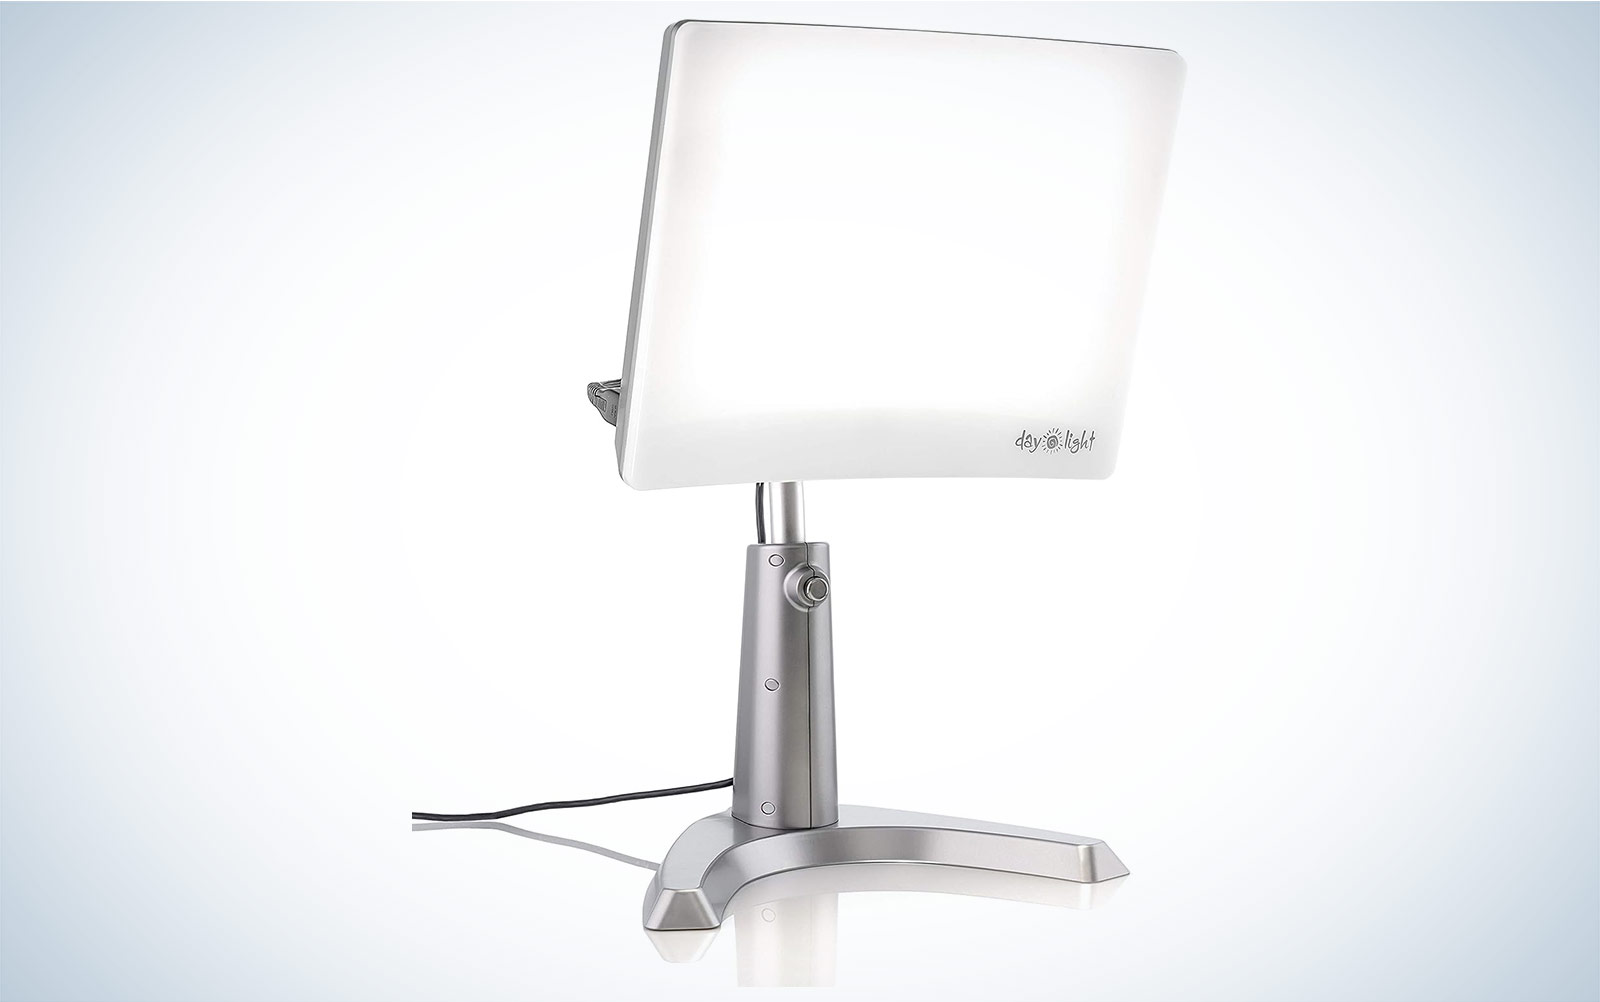 Adjustable Therapeutic Lamp Holder Customise brightness and color